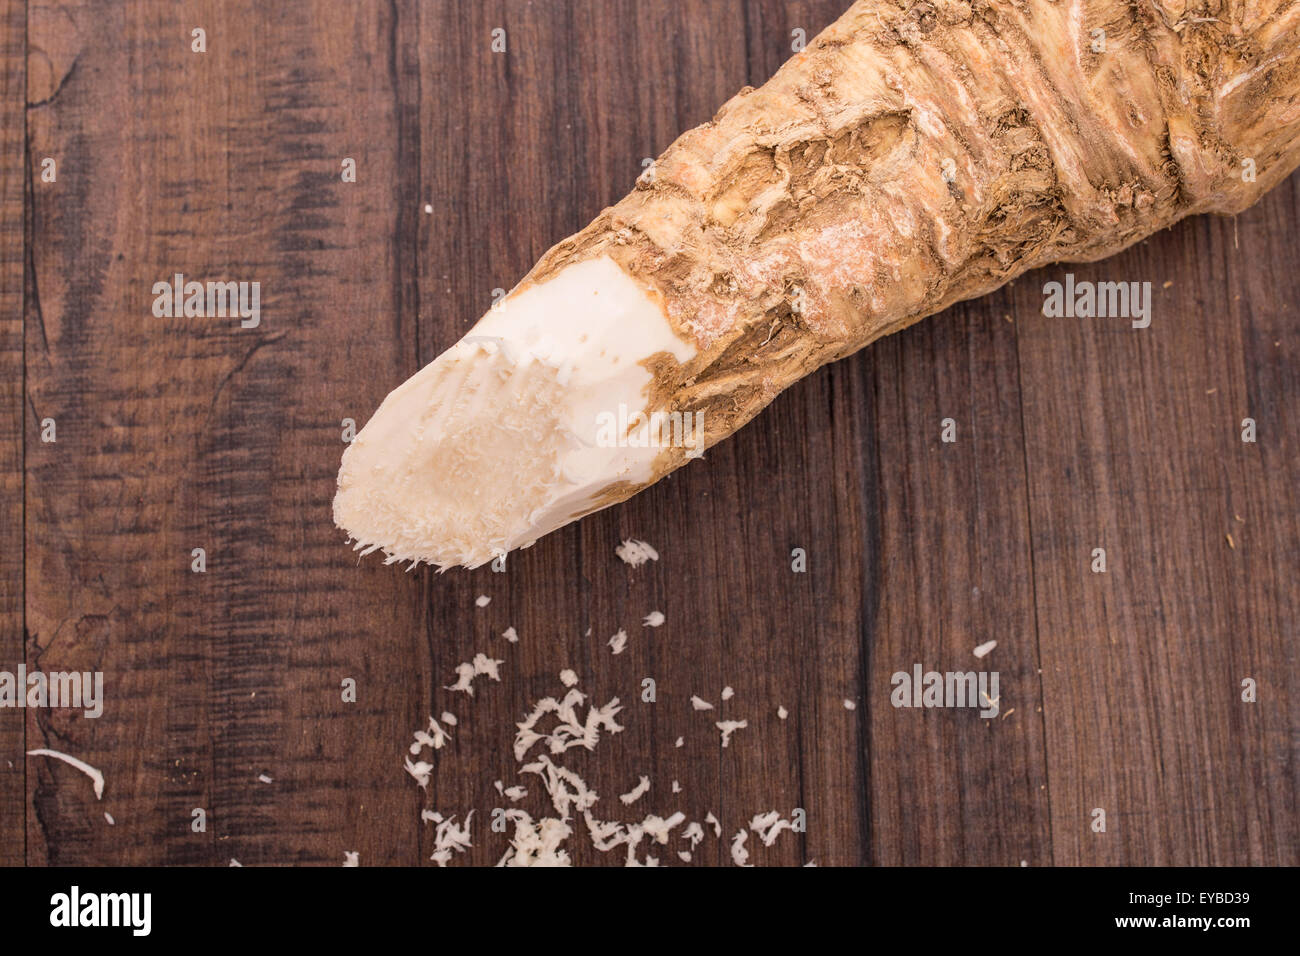 Raw grated horse radish on a brown wooden board Stock Photo